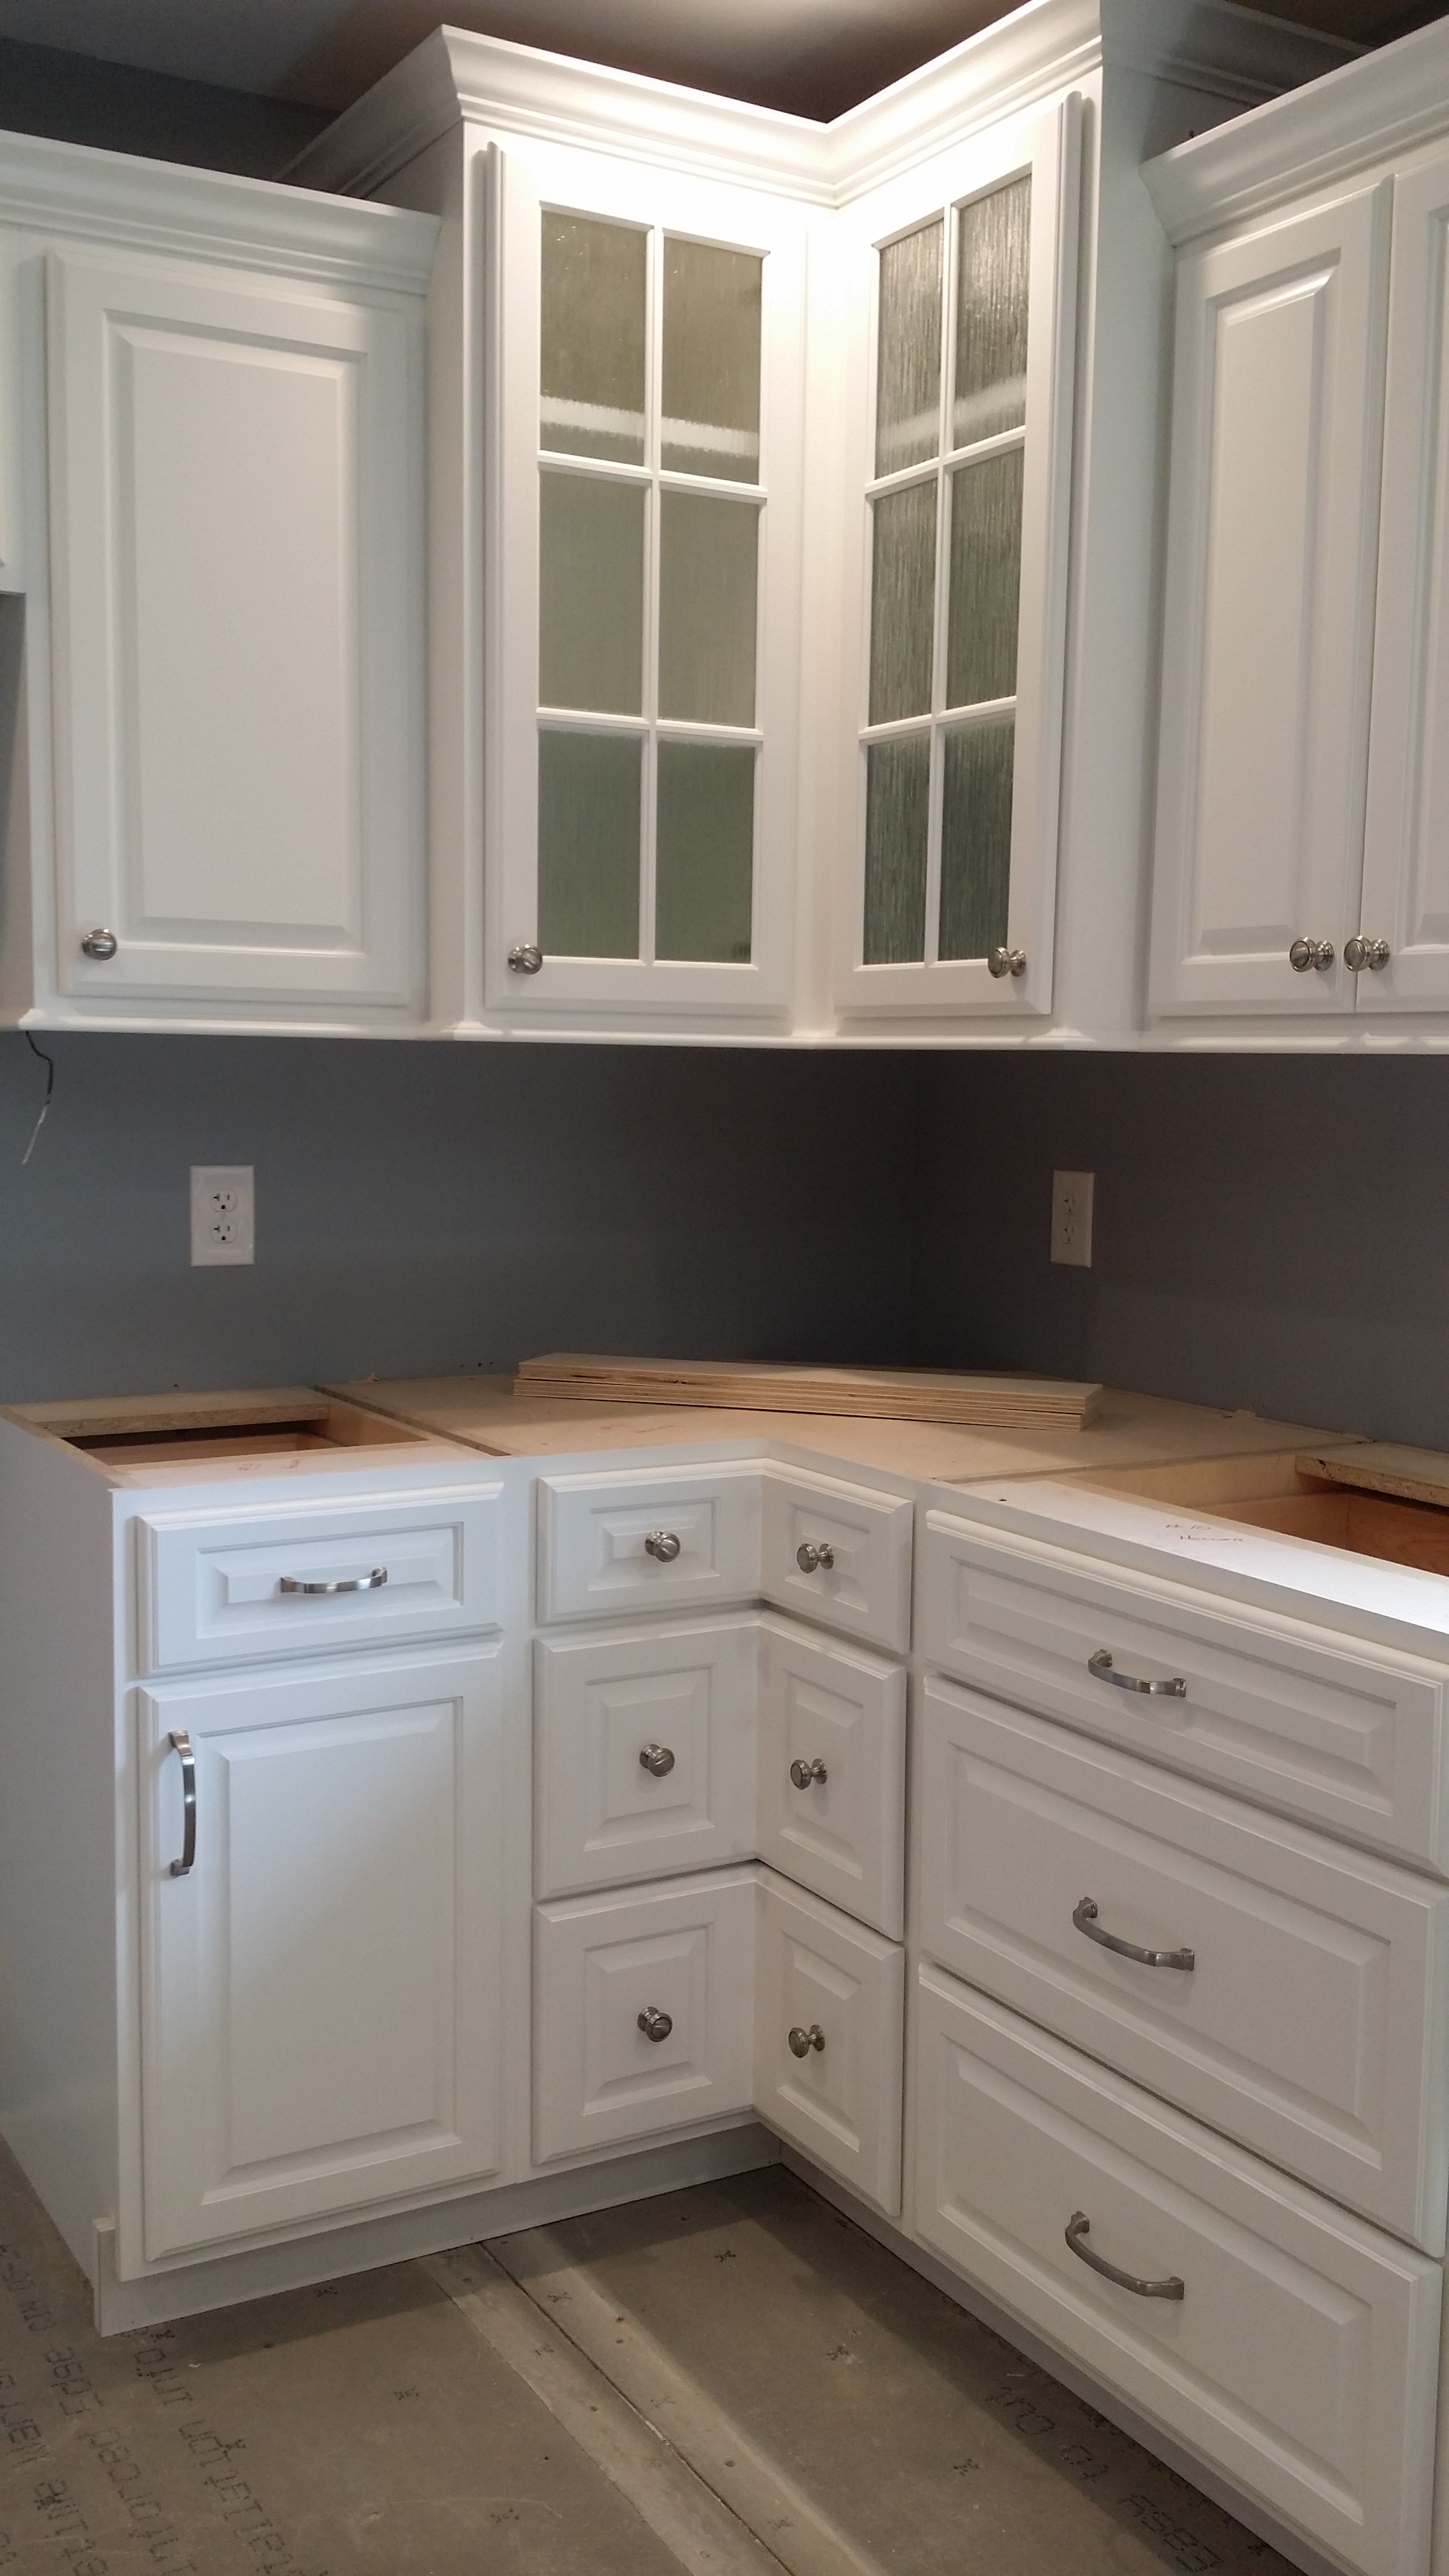 About Brew City Countertops Millwork Cabinet Makers Milwaukee Wi